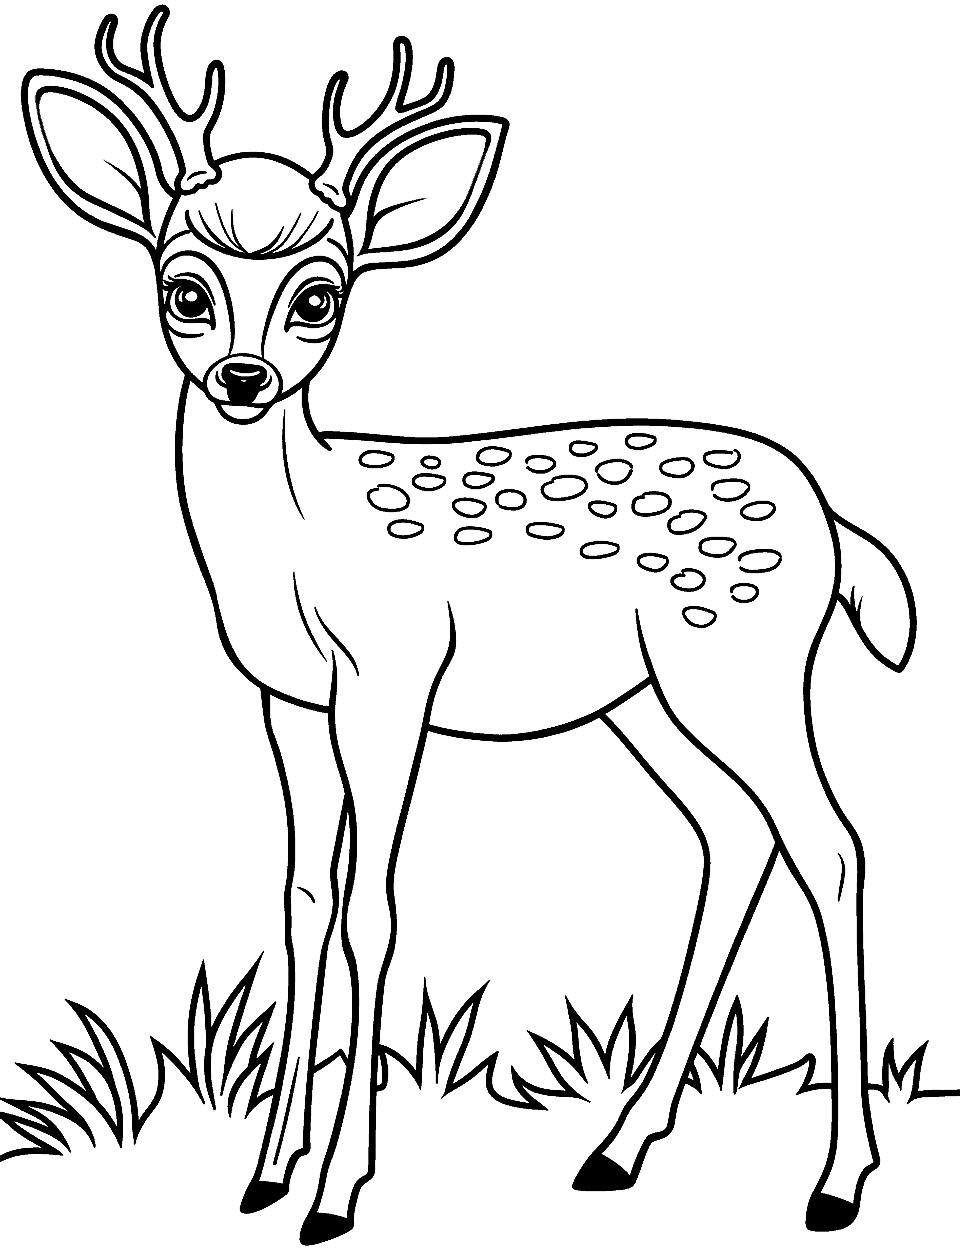 Baby Deer with Spots Coloring Page - A close-up of a baby deer, focusing on its innocent eyes and spotted fur.